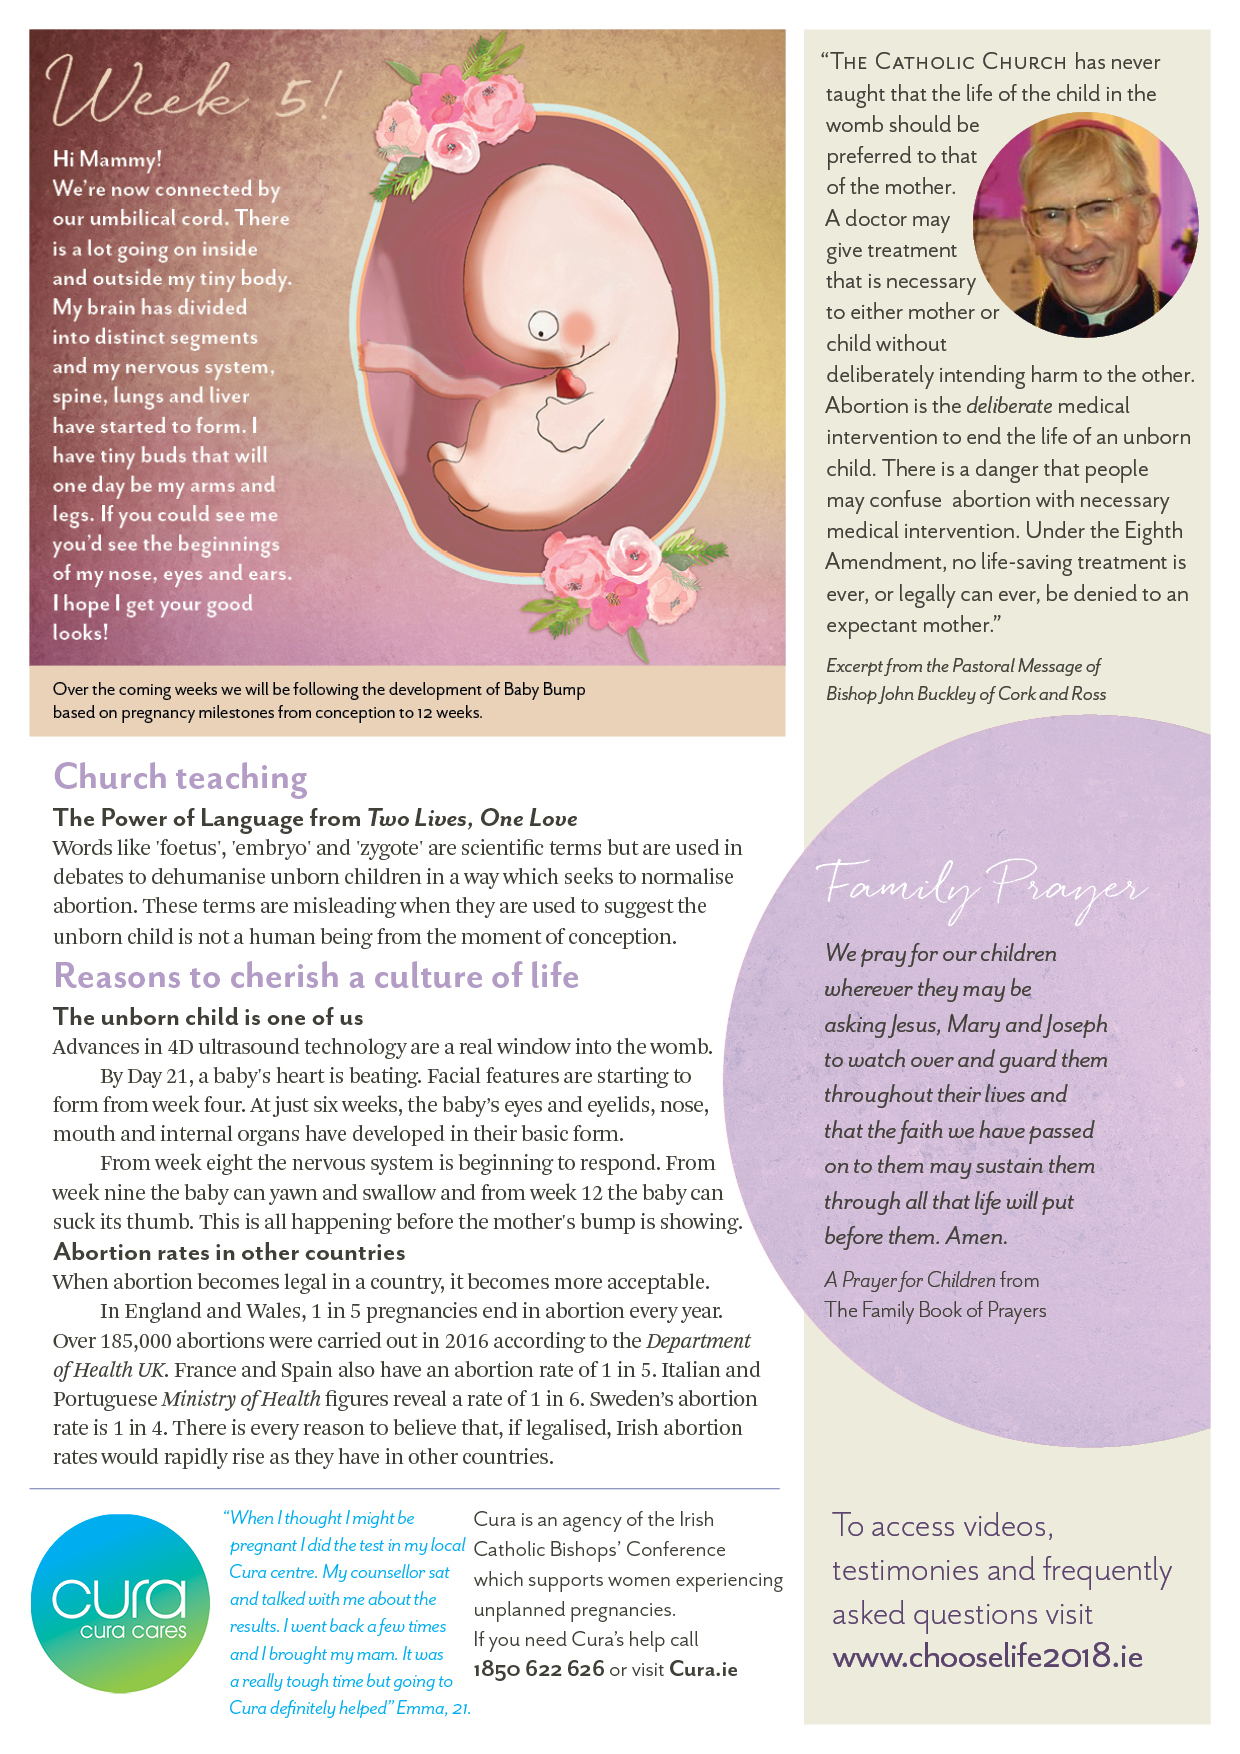 ChooseLife2018_Issue12_p2